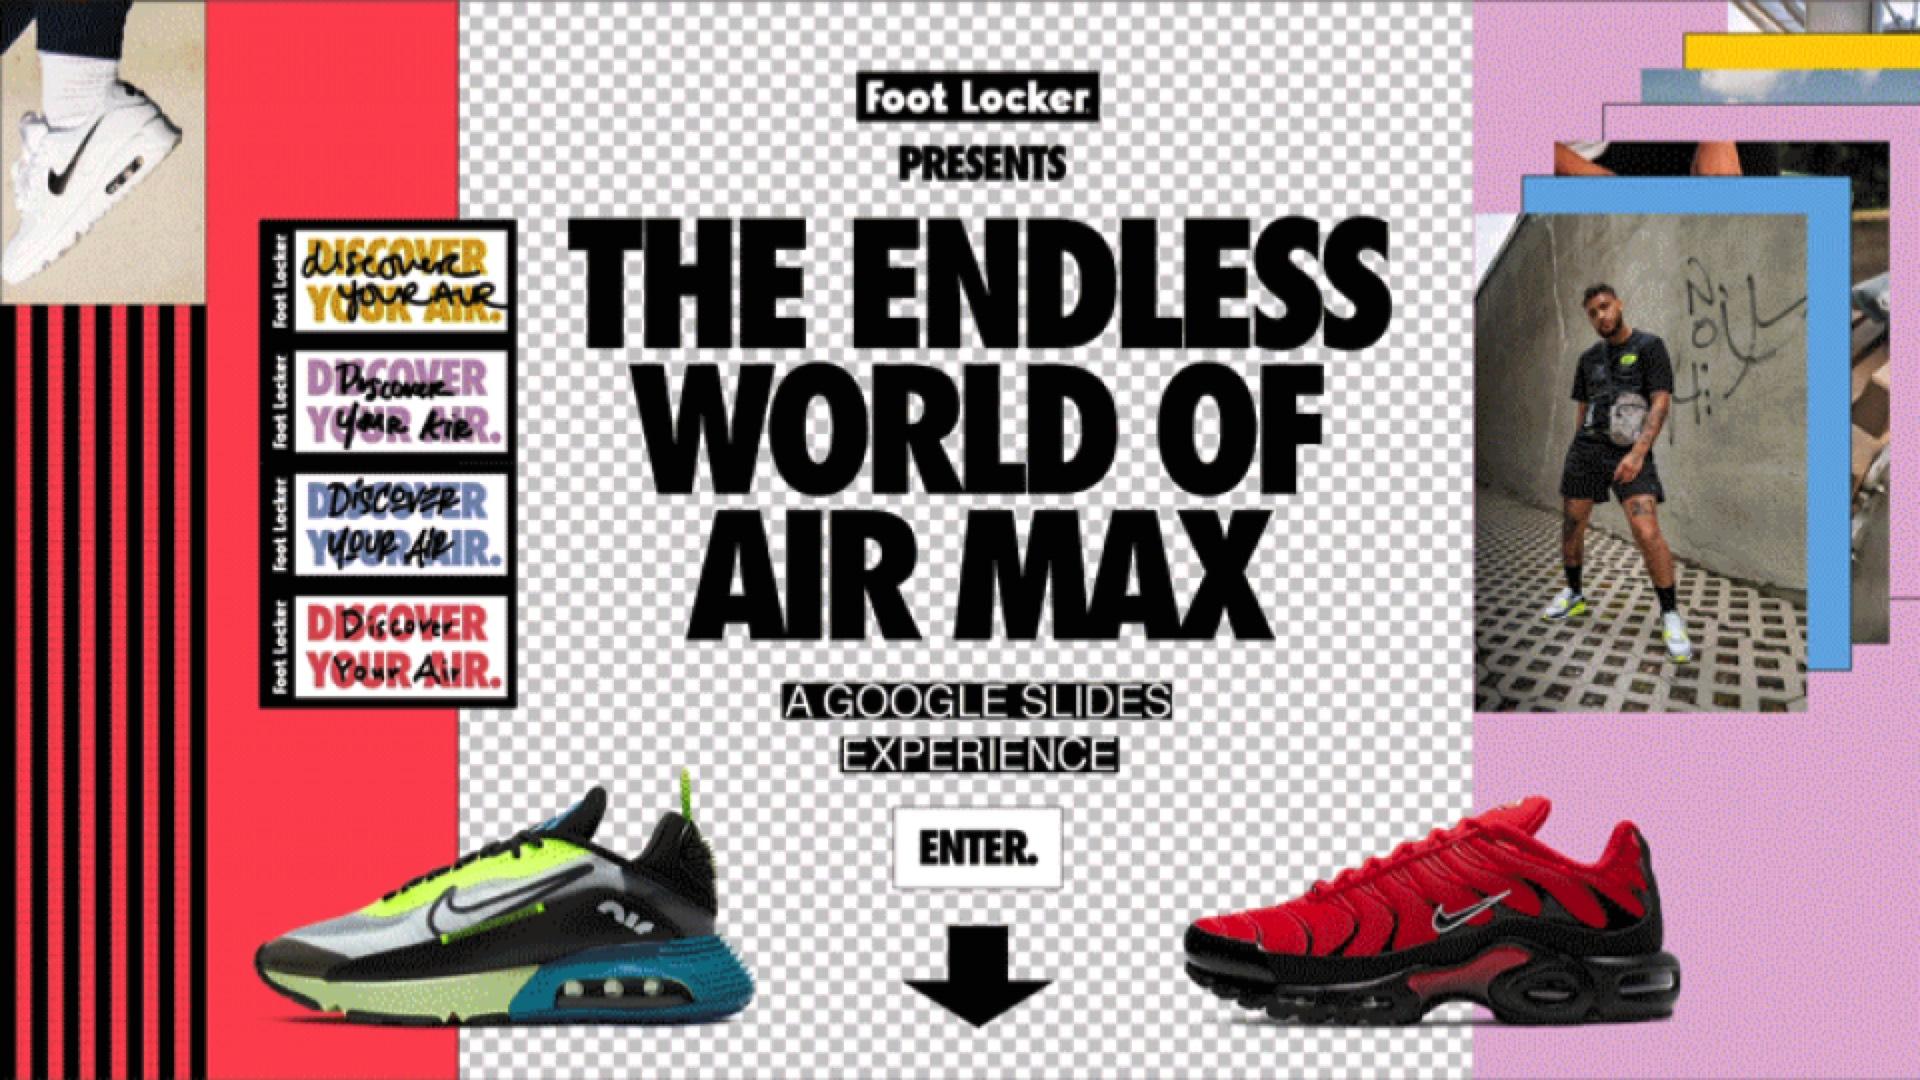 Adeevee. Only selected creativity Locker: The Endless World of Air Max